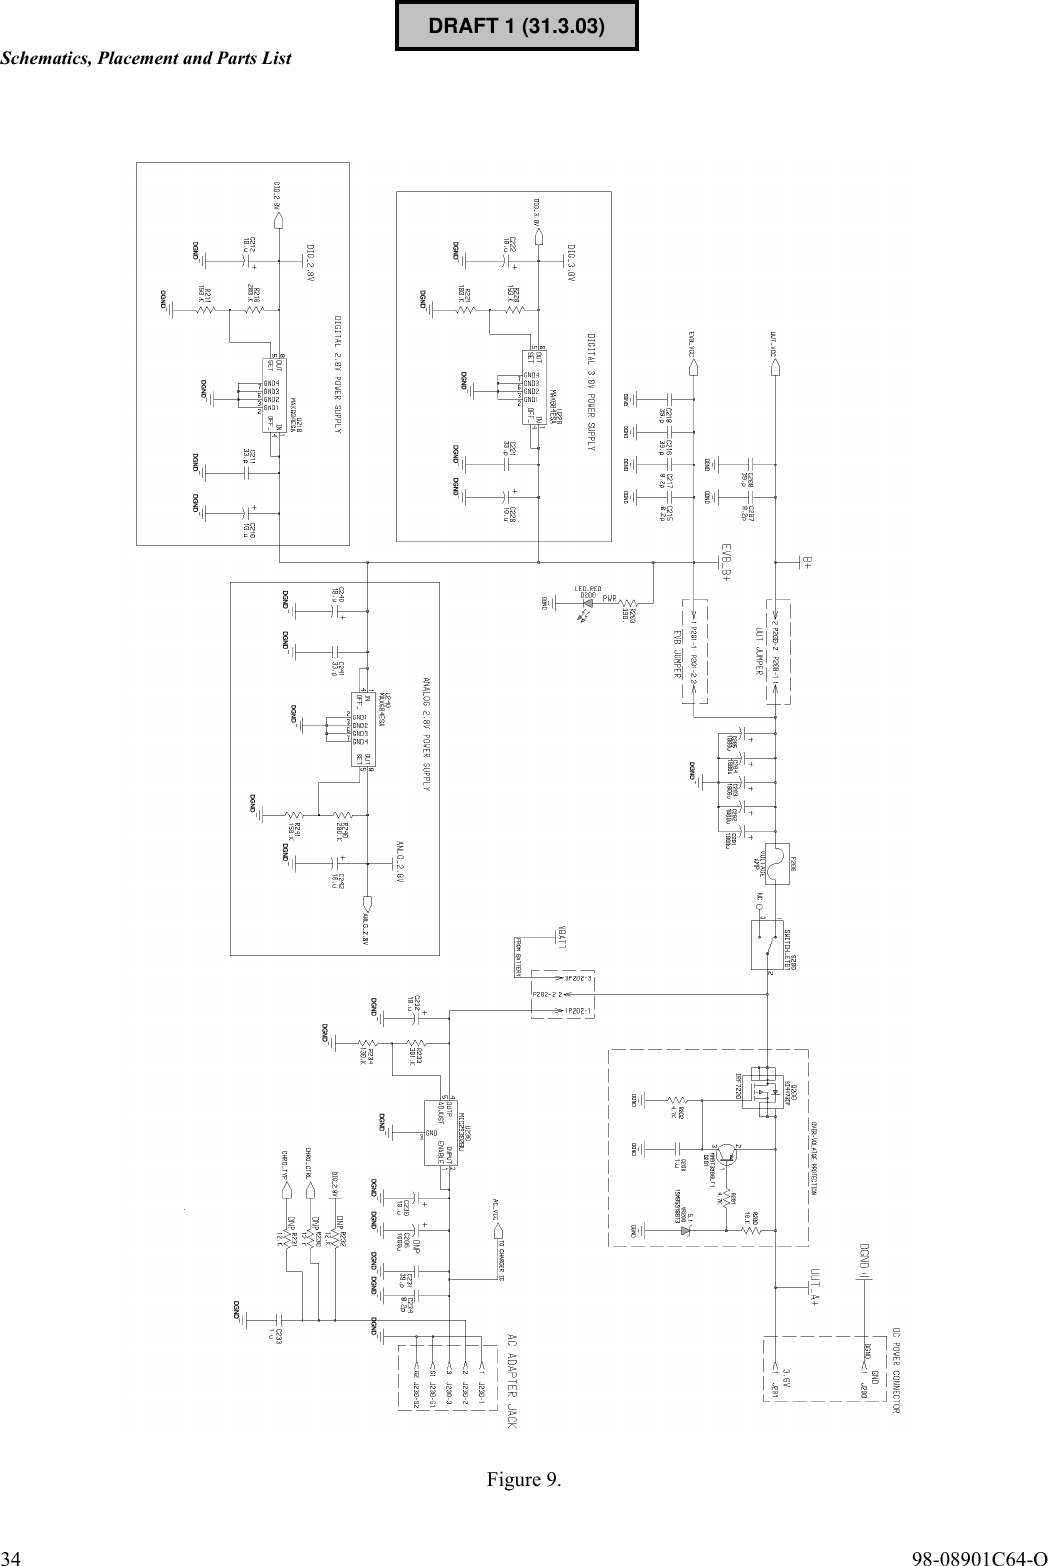 Schematics, Placement and Parts List34  98-08901C64-OFigure 9.DRAFT 1 (31.3.03)